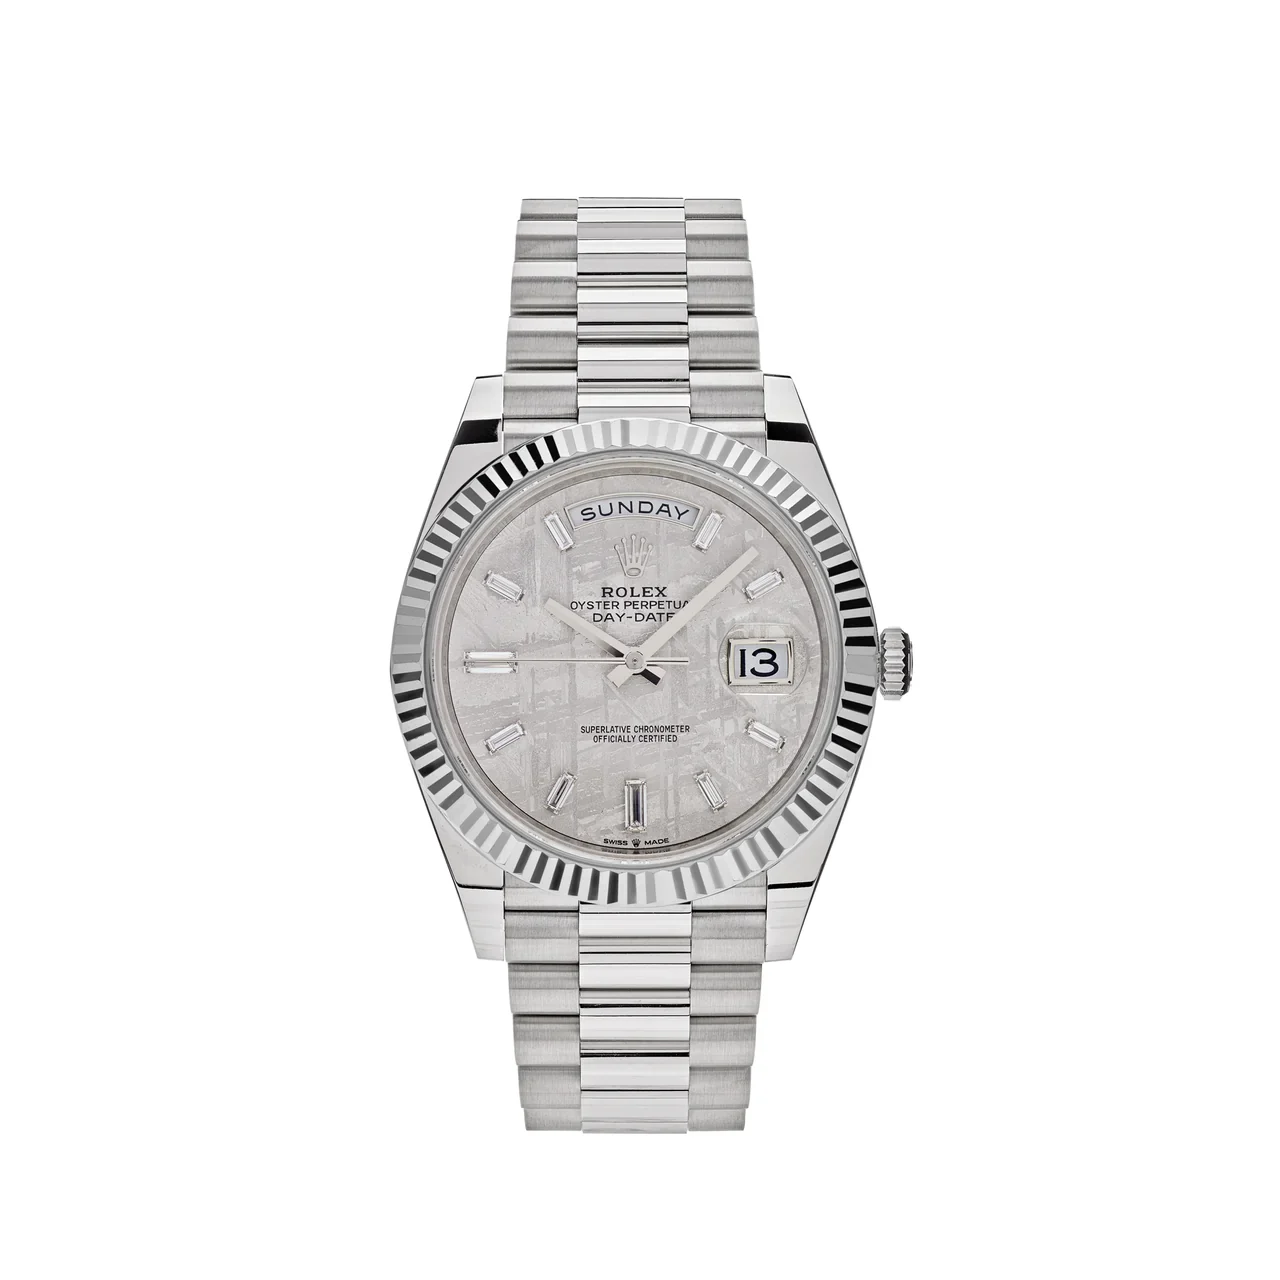 2021 Rolex Day-Date 40 White Gold / Fluted / Meteorite / Baguette Diamond-Set / President 228239-0055 Listing Image 1